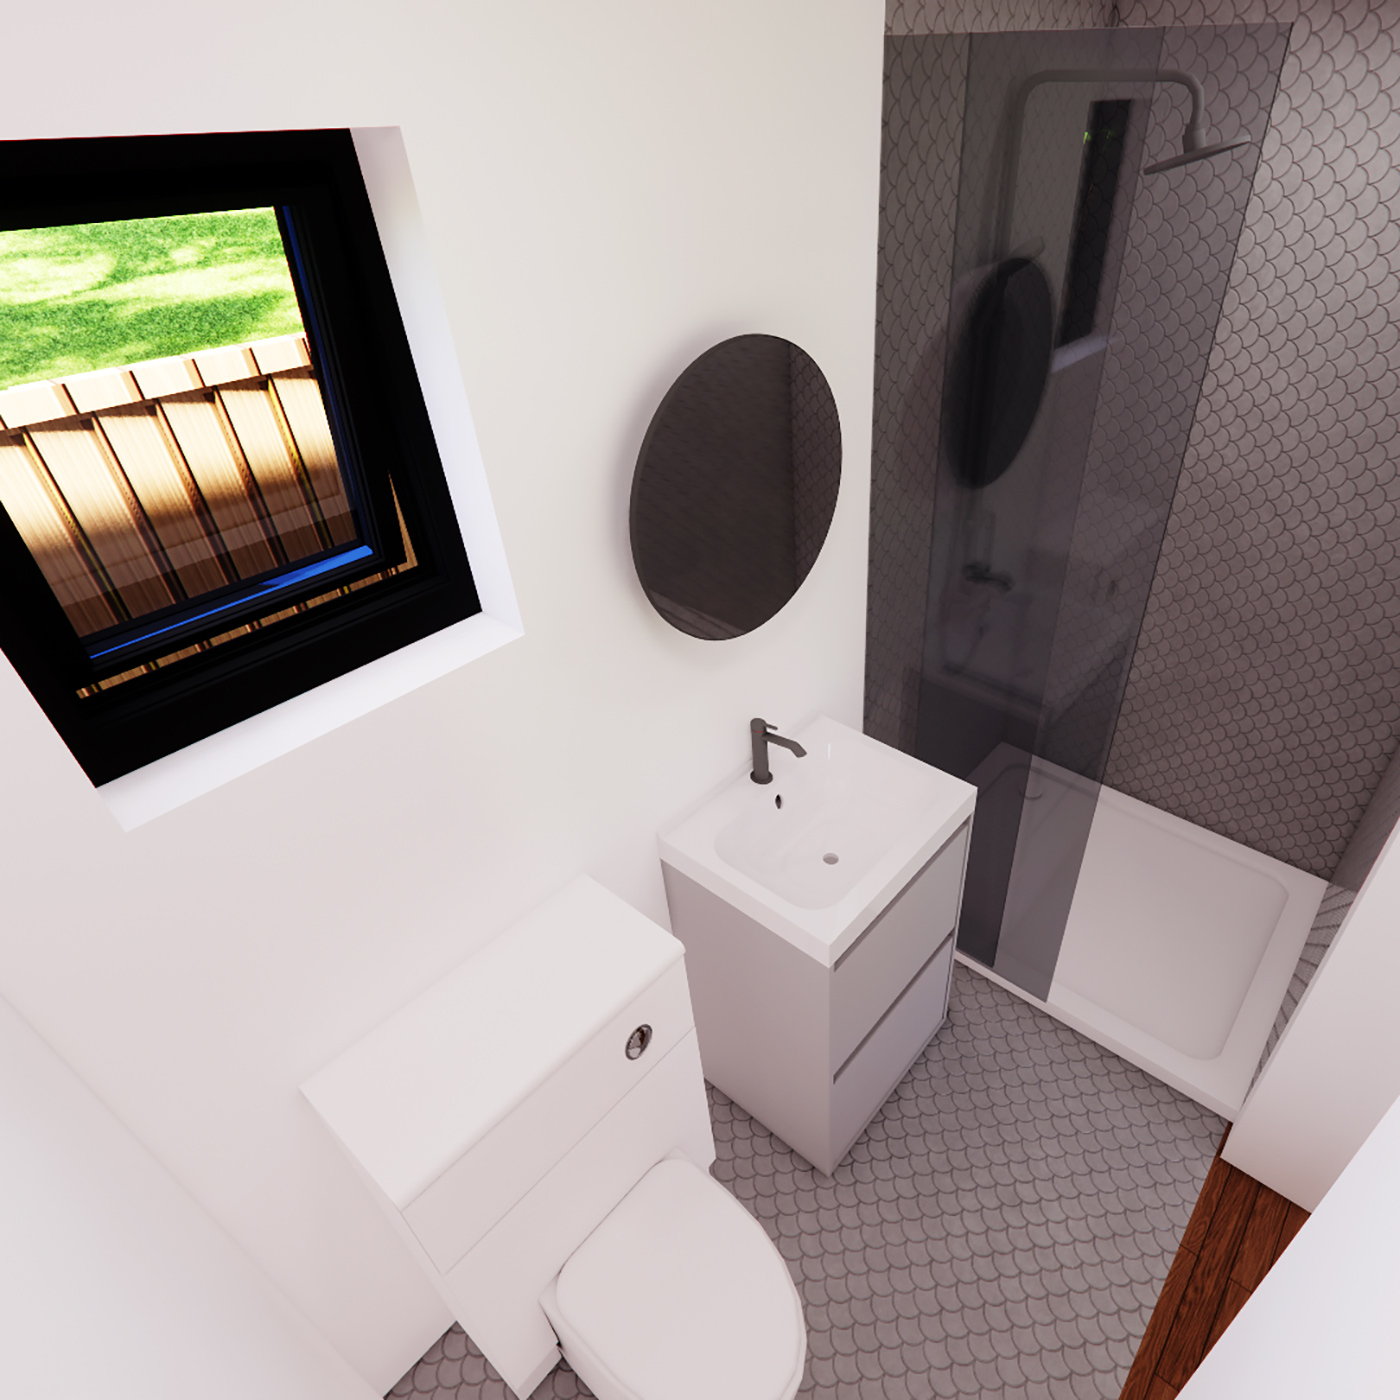 Bathroom visualisation for 5.0m by 7.4m mobile home